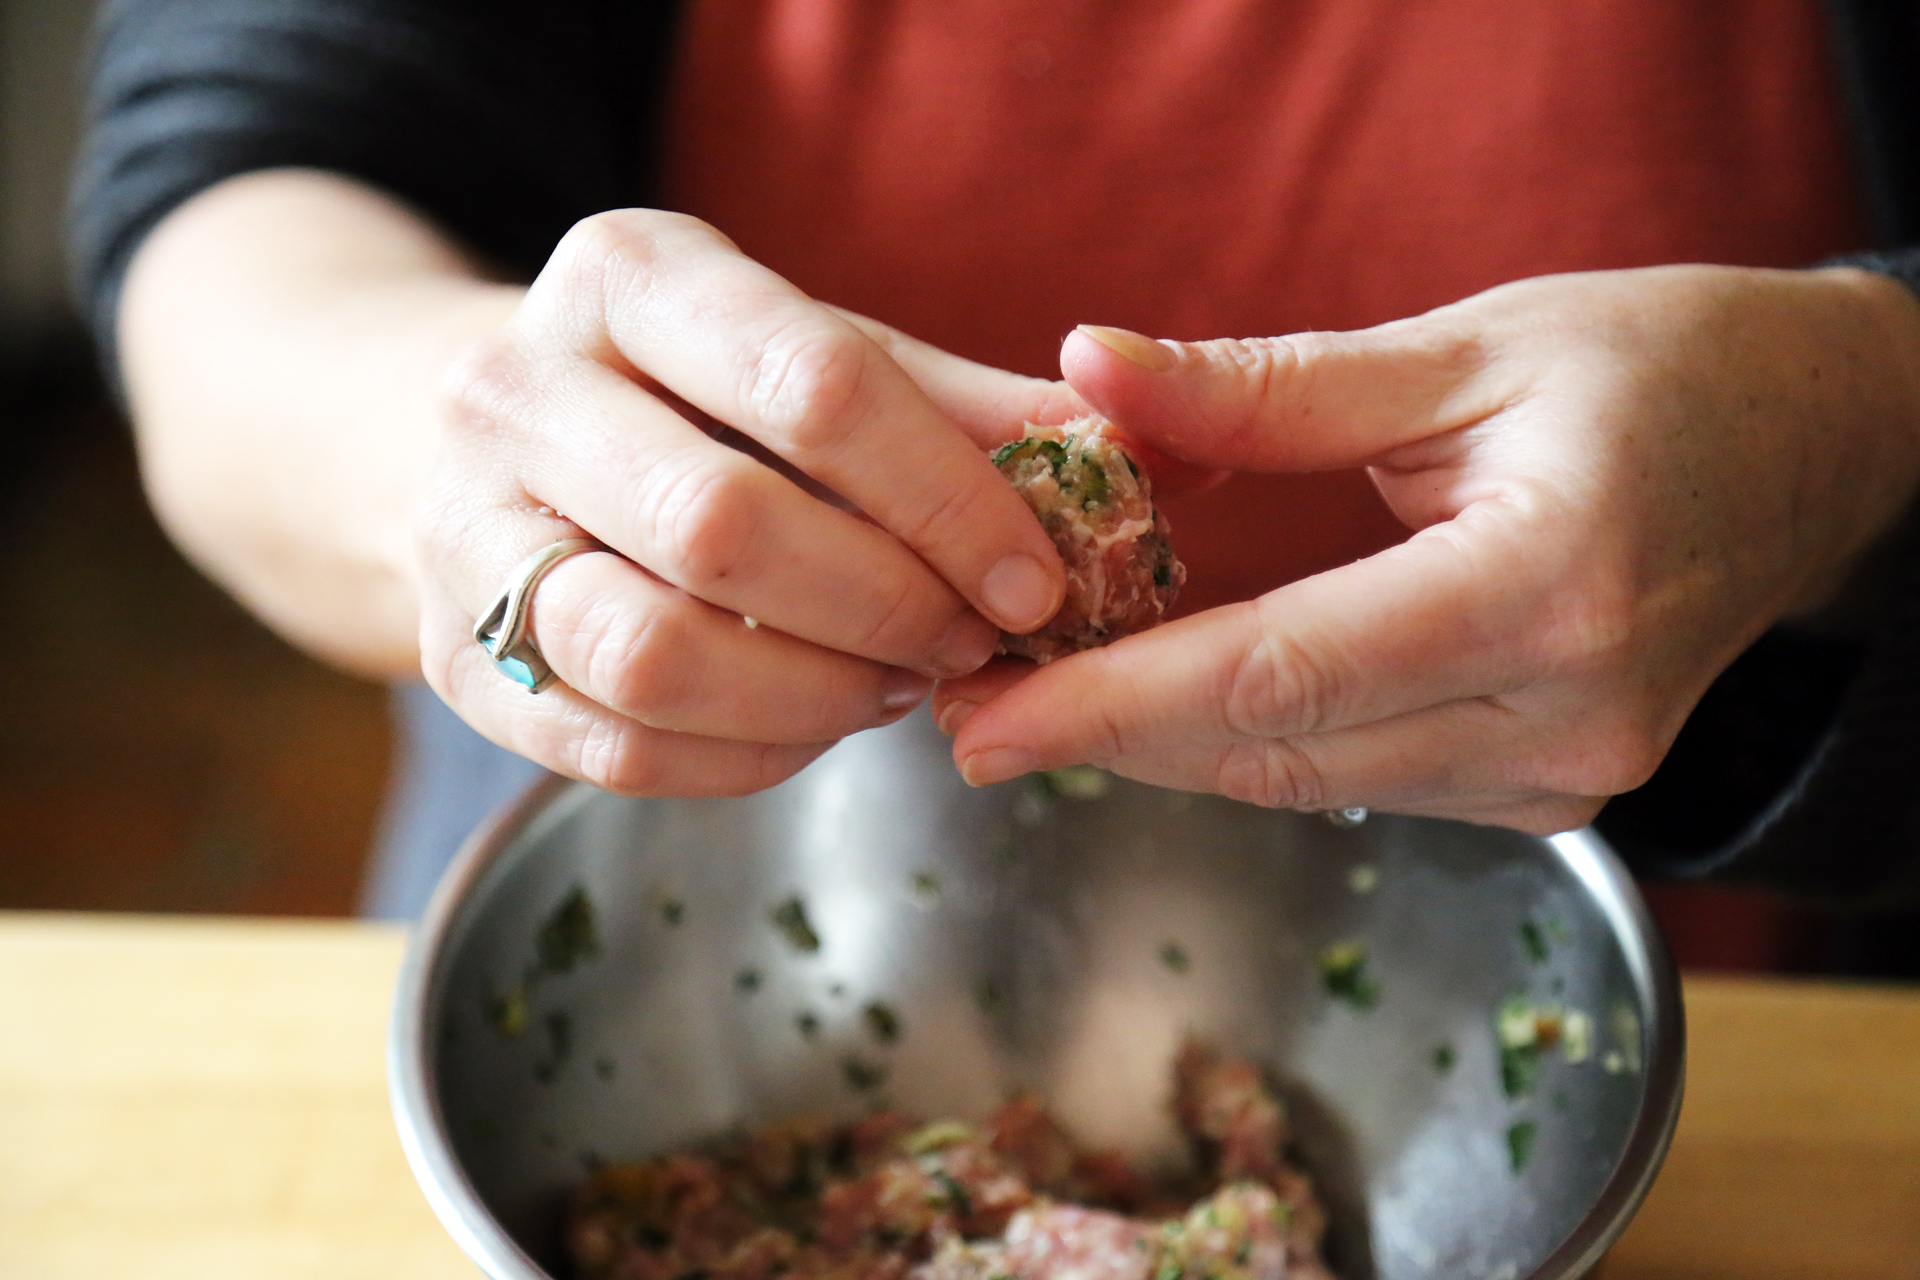 Using tablespoon measure, roll the mixture into meatballs.